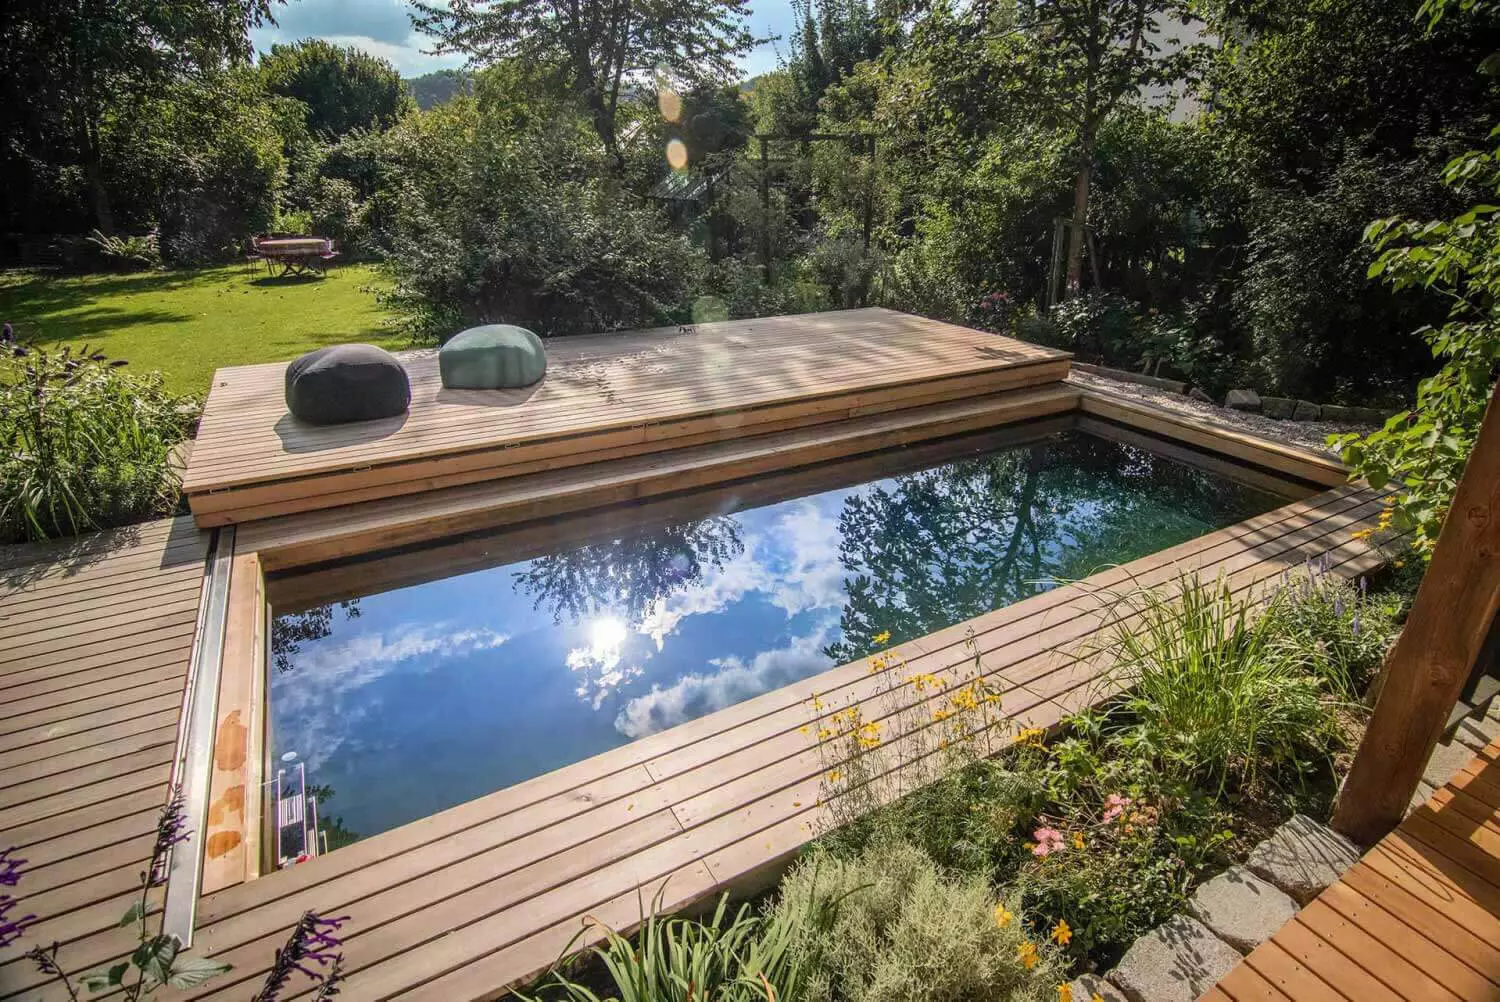 A wonderful garden with a Holc natural pool. The natural pool made of wood.